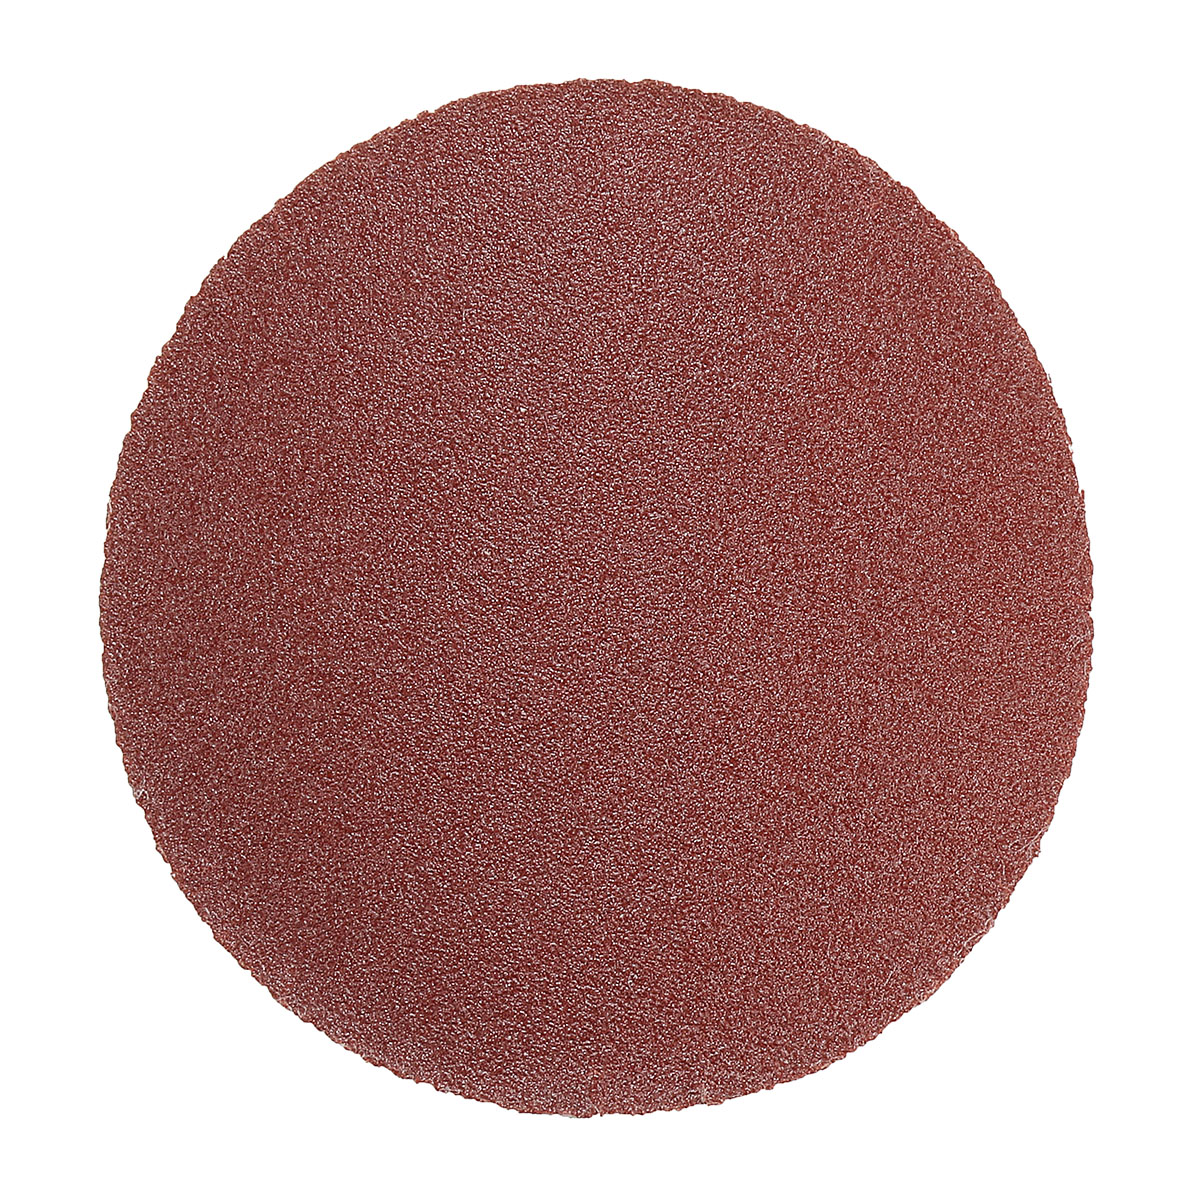 60pcs-3-Inch-6080120-Grit-Sandpaper-with-75mm-Hand-Polishing-Pad-for-Polishing-Abrasive-Tools-1680185-6